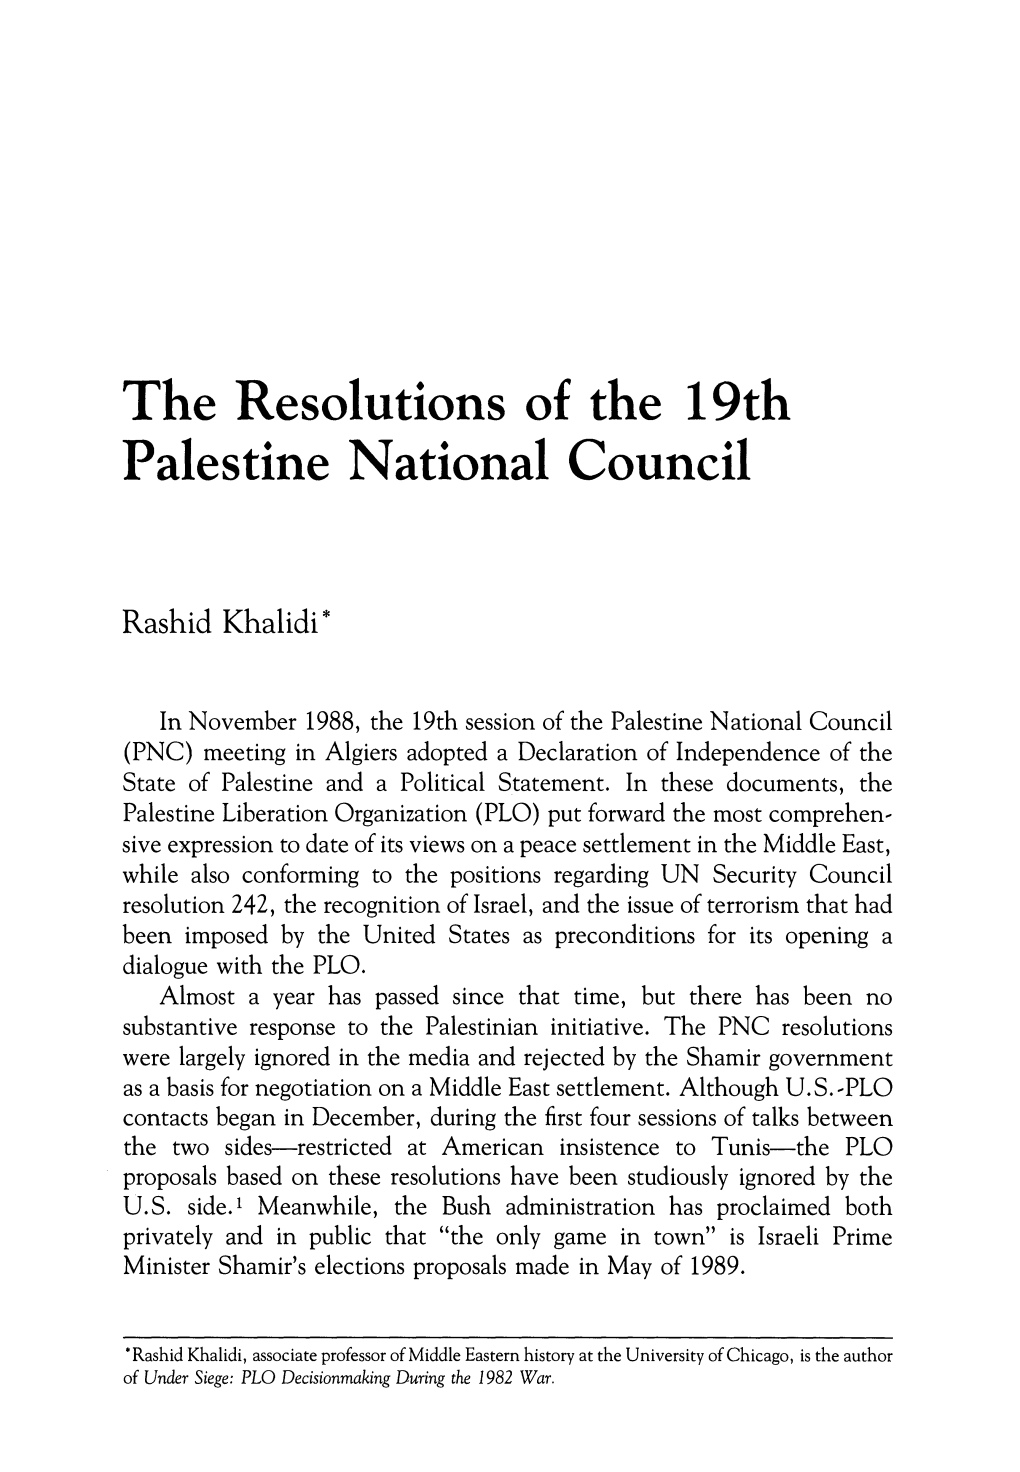 The Resolutions of the 19Th Palestine National Council